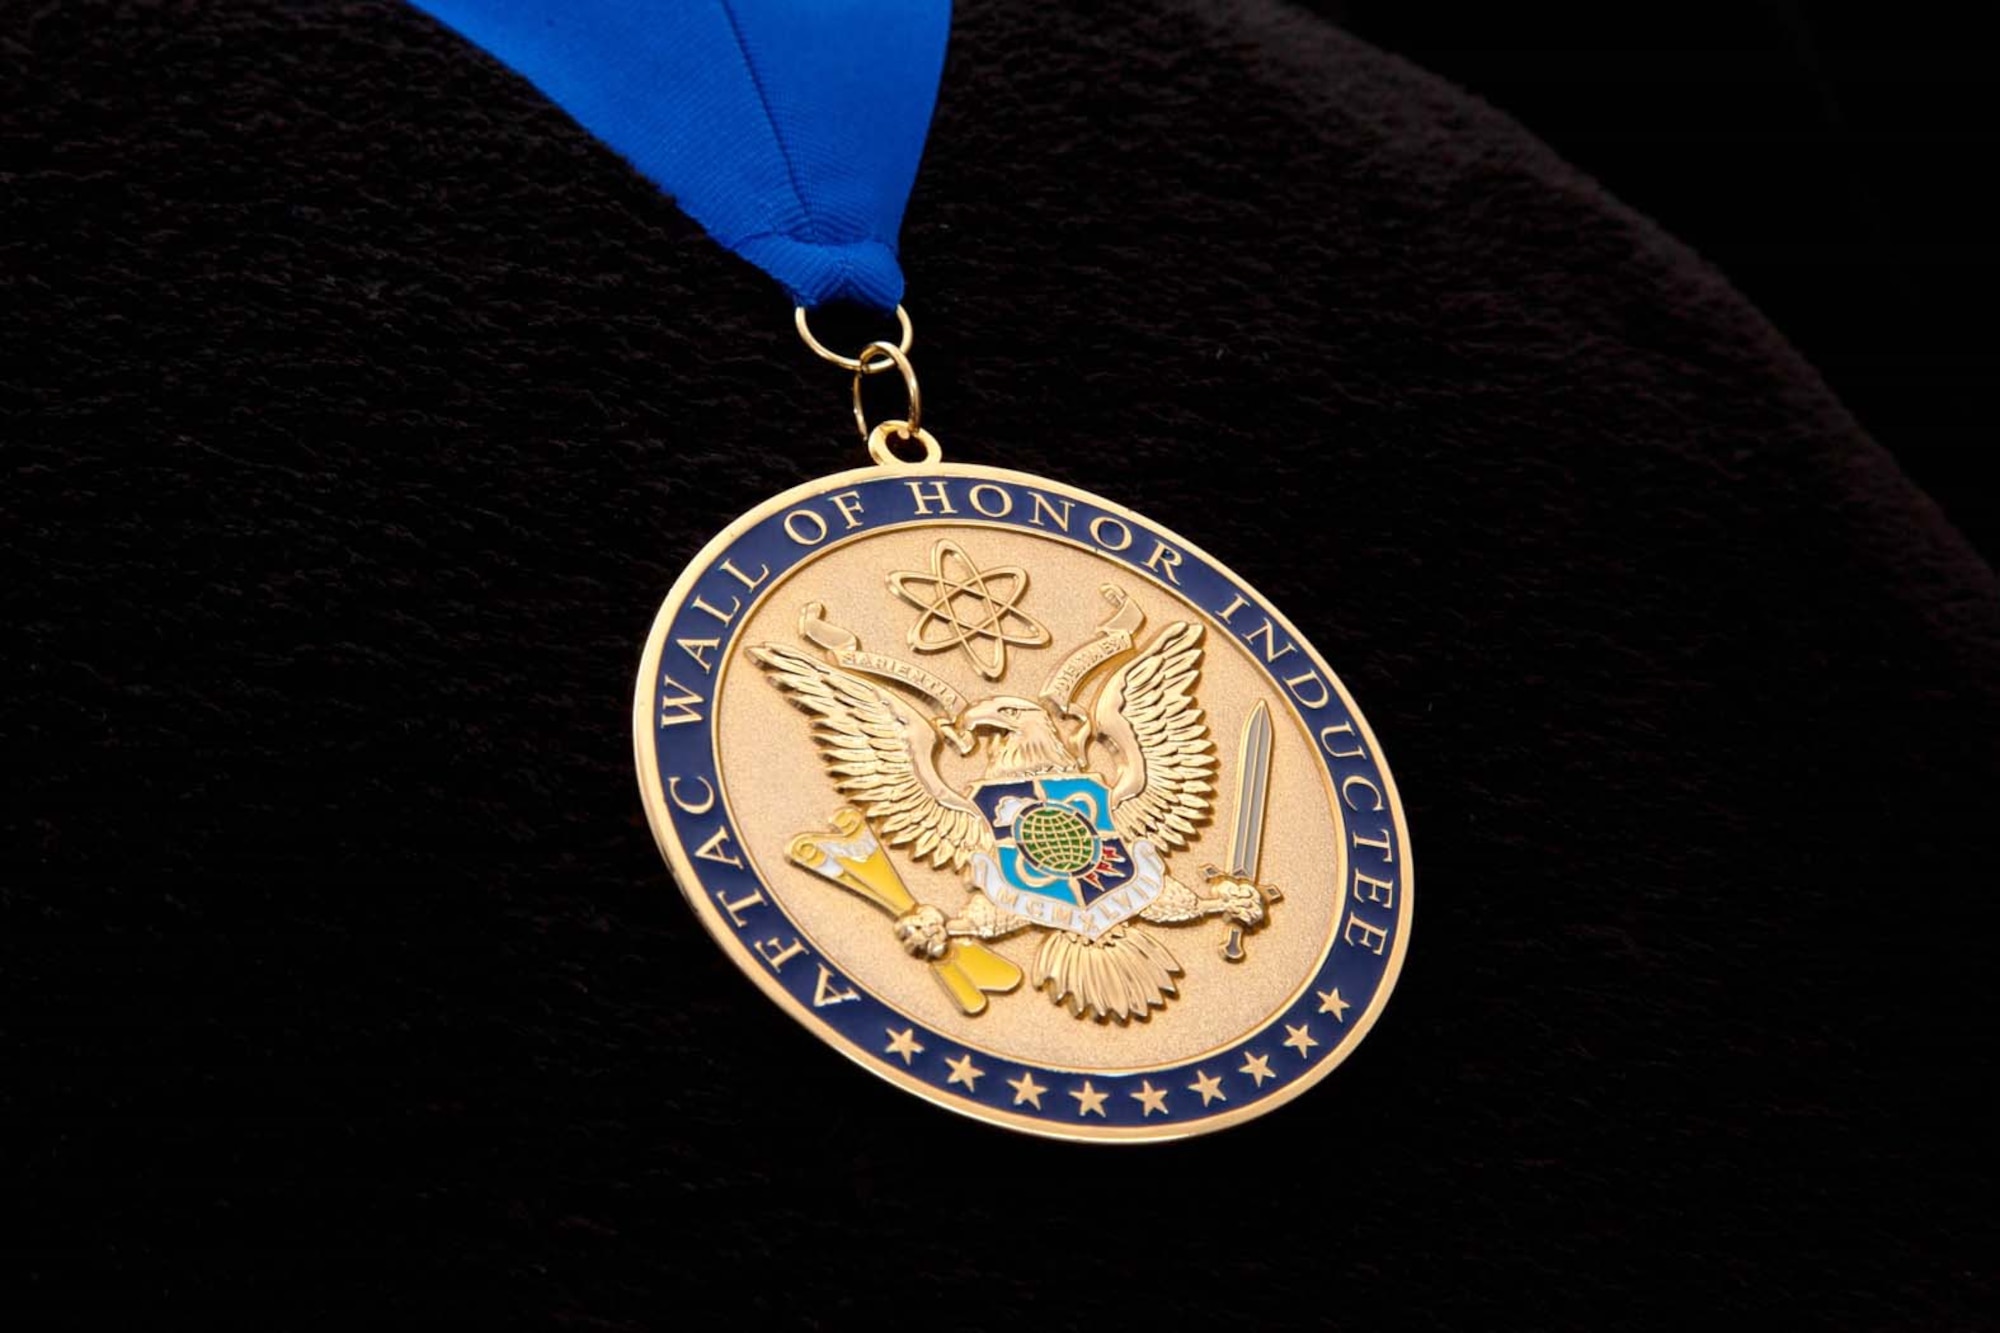 The medallion pictured here was presented to newest inductees to the Air Force Technical Applications Center's Wall of Honor at a ceremony May 26, 2021.  The medallion, which was created by 1st Lt. Adam Satterfield and Master Sgt. Chad Taguba, both members of AFTAC, symbolizes the inductees' contributions to long range detection and nuclear treaty monitoring, AFTAC's primary mission.  The back of the medallion has a personalized inscription that reads, “Let this medallion signify its recipient is a member of an elite and noble group of Airmen who stand in silent vigil for the good of all humankind.”  (U.S. Air Force photo by Master Sgt. Chad Taguba)